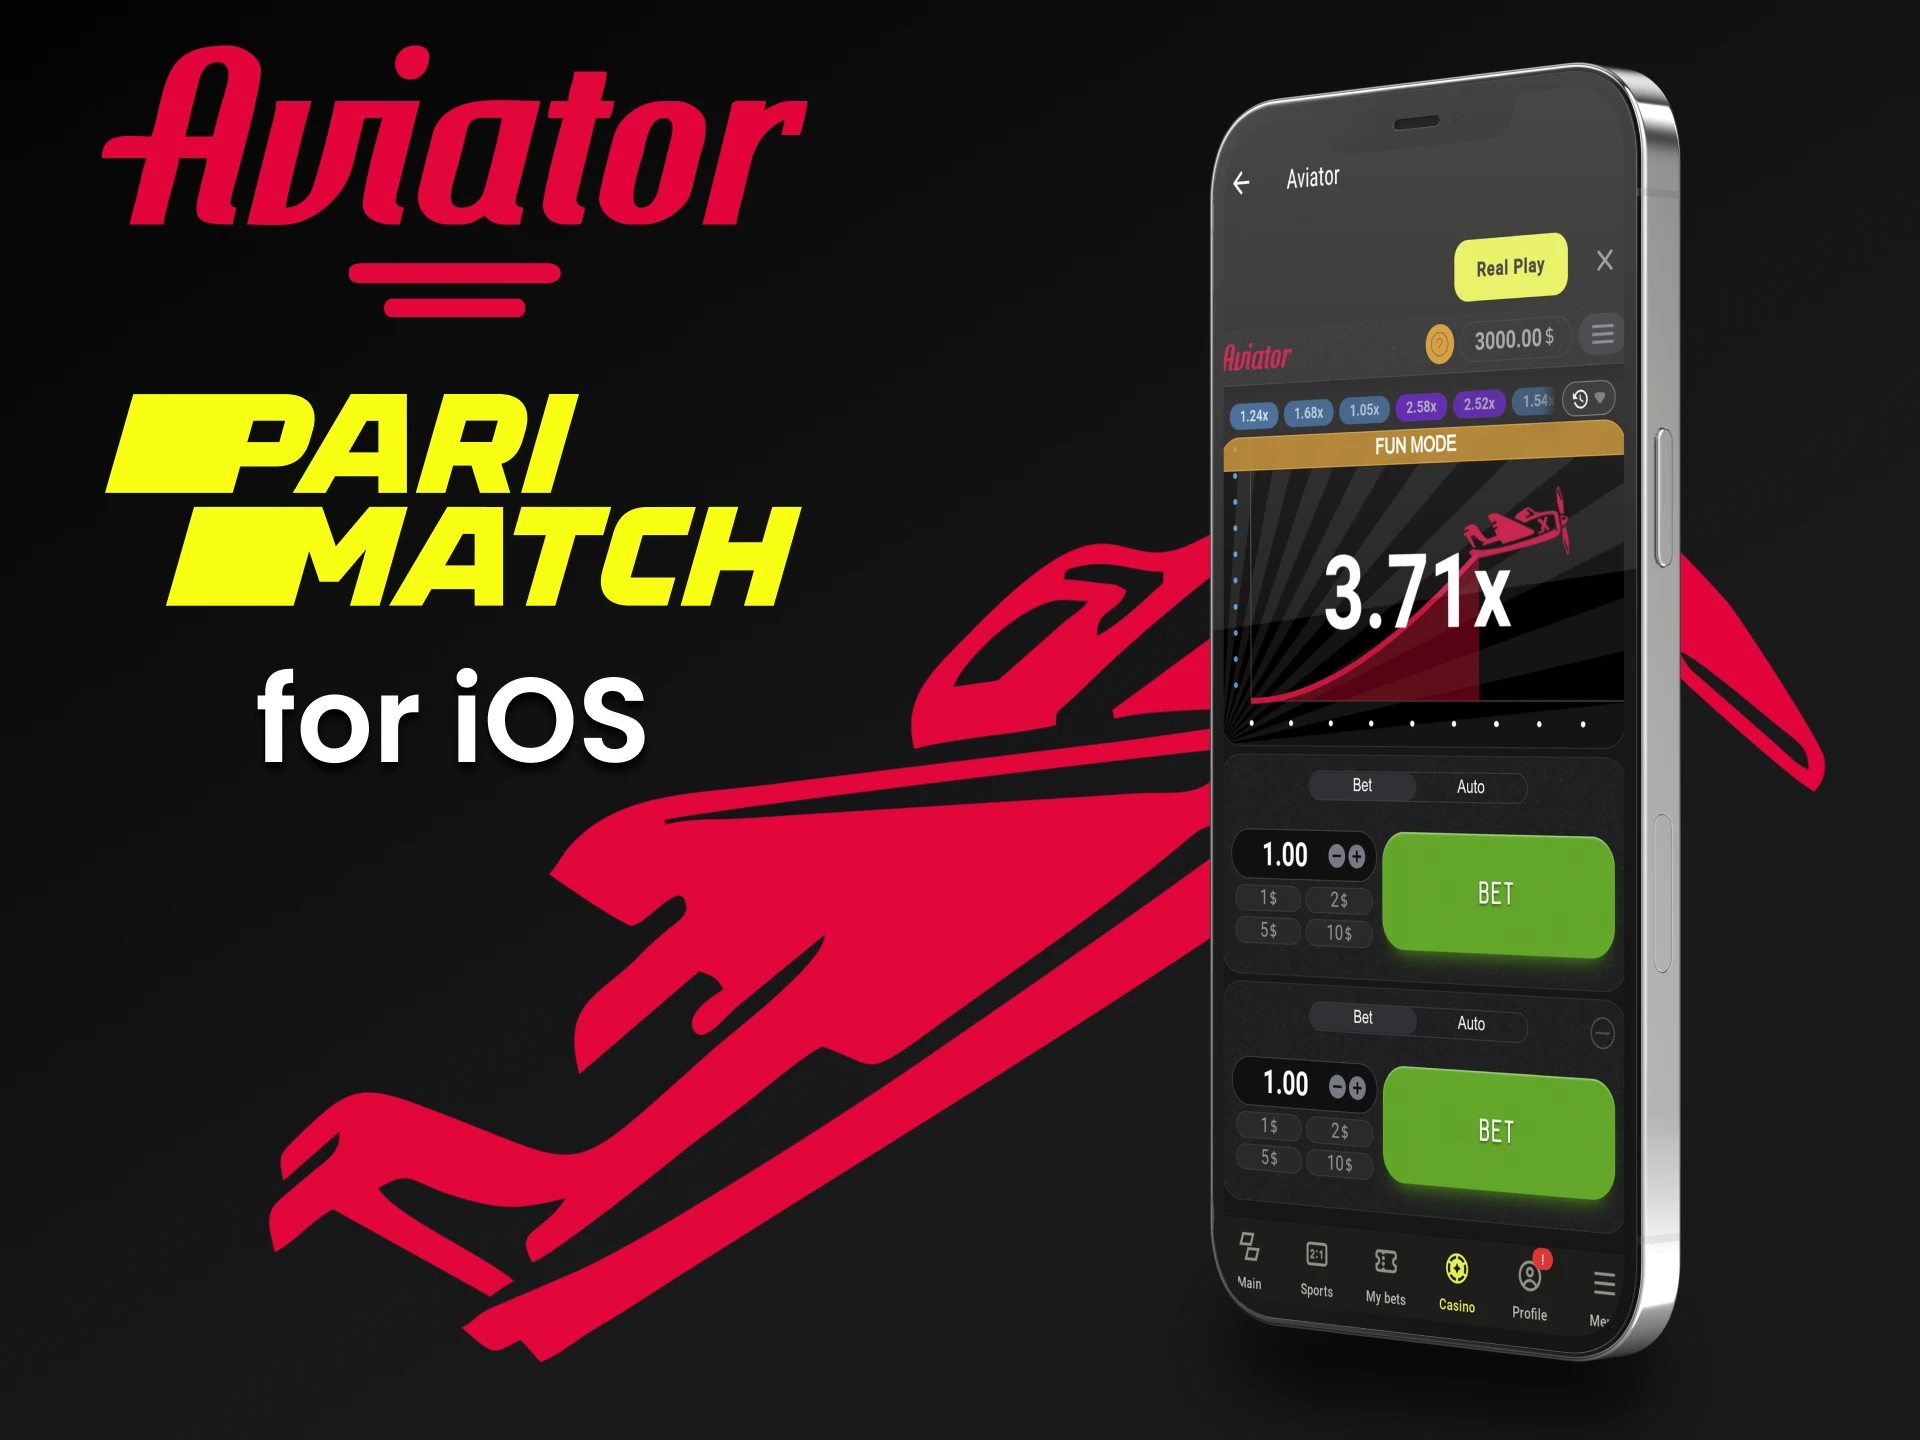 Play Aviator by Parimatch on your iOS device.